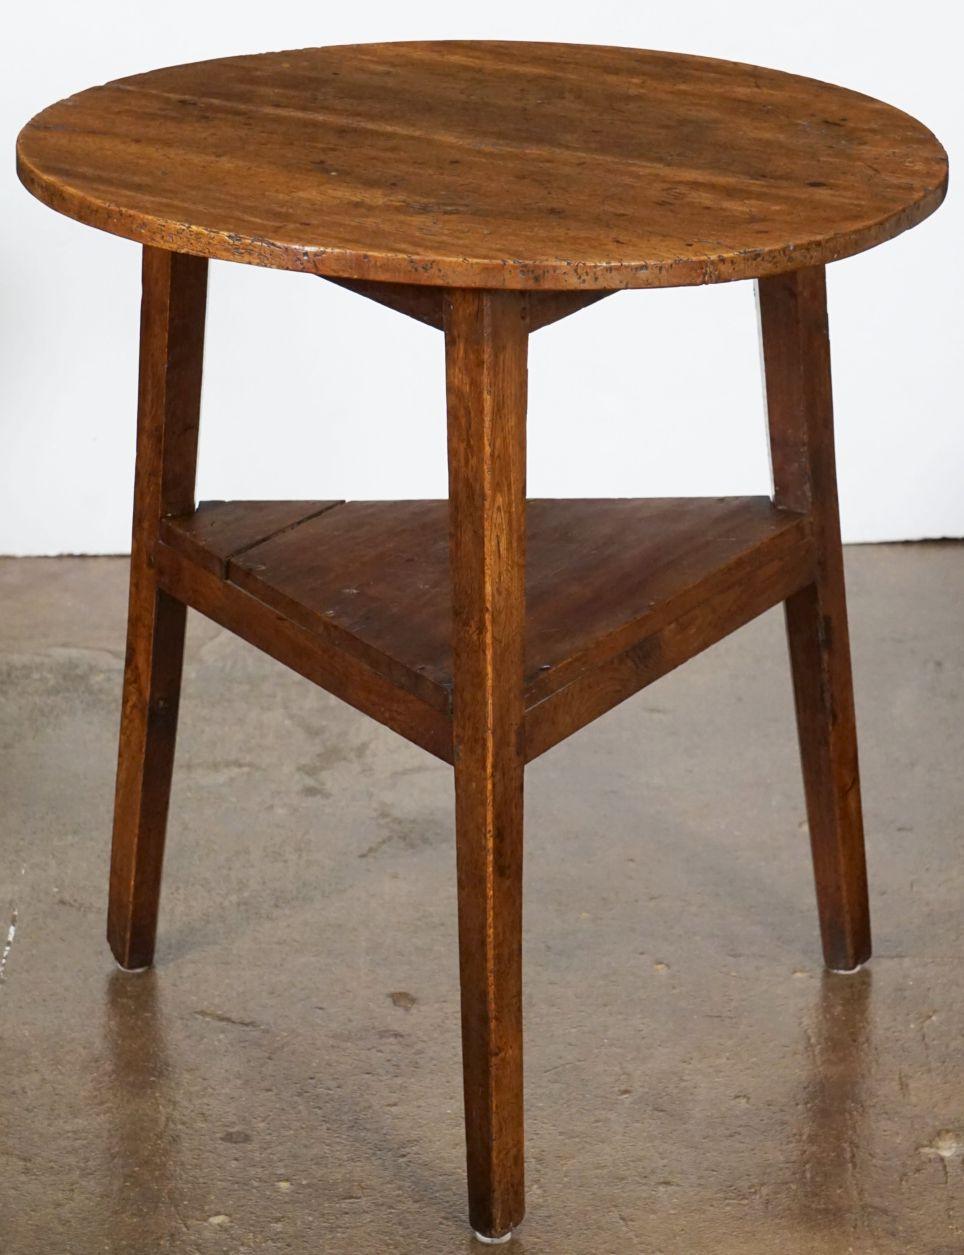 A handsome English cricket table of patinated wood from the Georgian Era, featuring the traditional round or circular top over a tripod base with pegged joins and triangular under-tier shelf.

Makes a nice occasional table or side table.

Dimensions